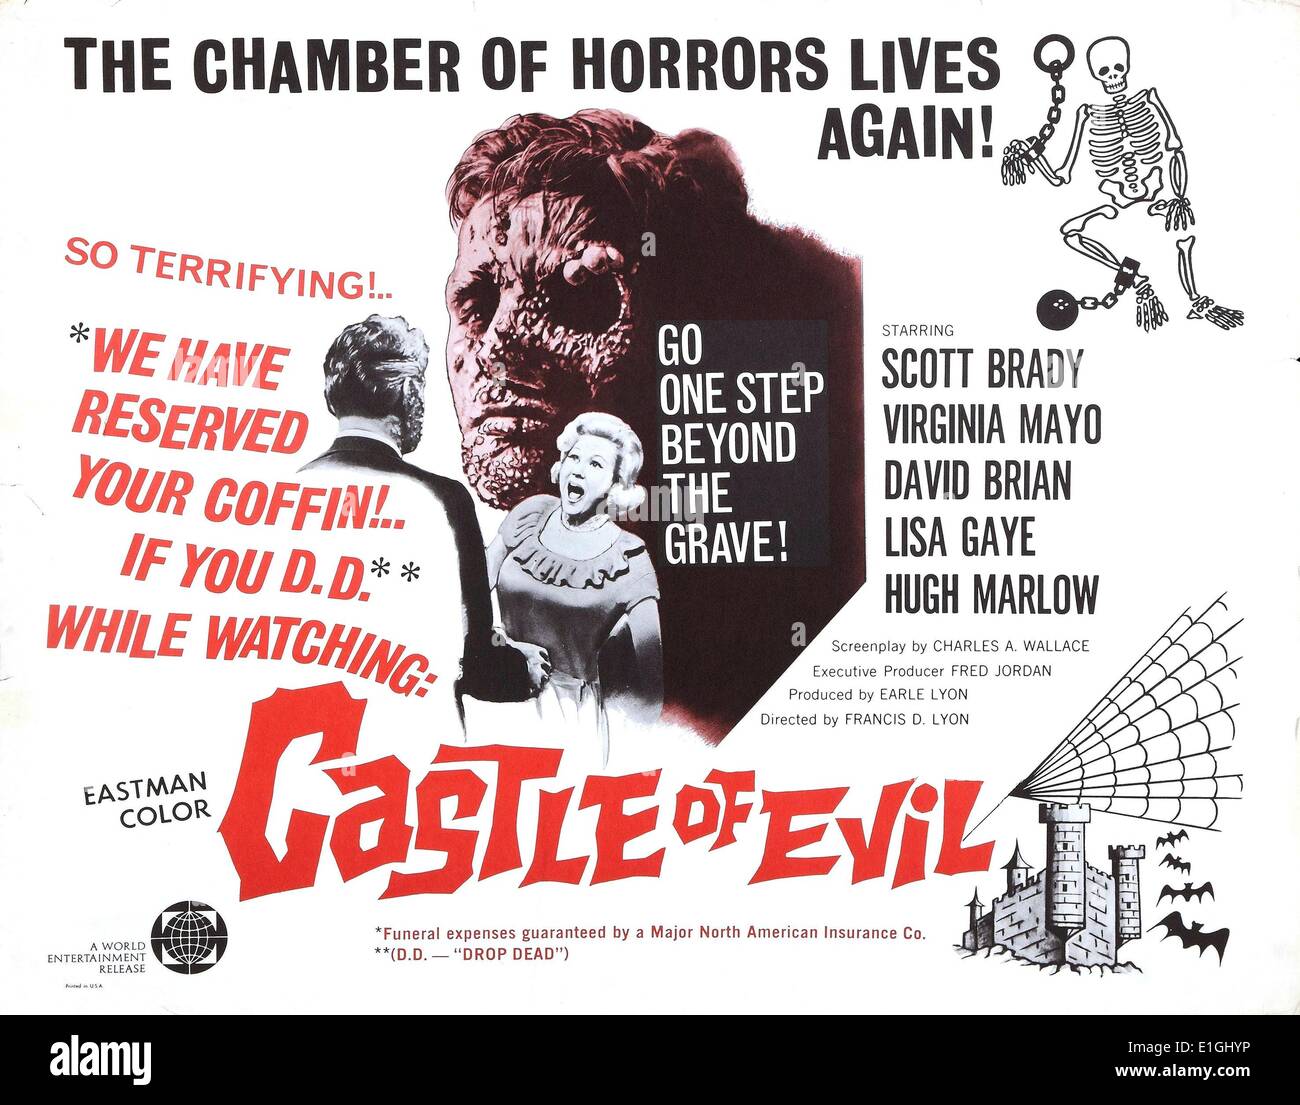 Castle of Evil athriller staring: Scott Brady, Virginia Mayo, David Brian, Lisa Gaye and Hugh Marlow. The relatives of a recently deceased man named Kovac gather at is creepy mansion for the reading of the will. Before the will can be read, however, the relatives began to be murdered one by one. Stock Photo